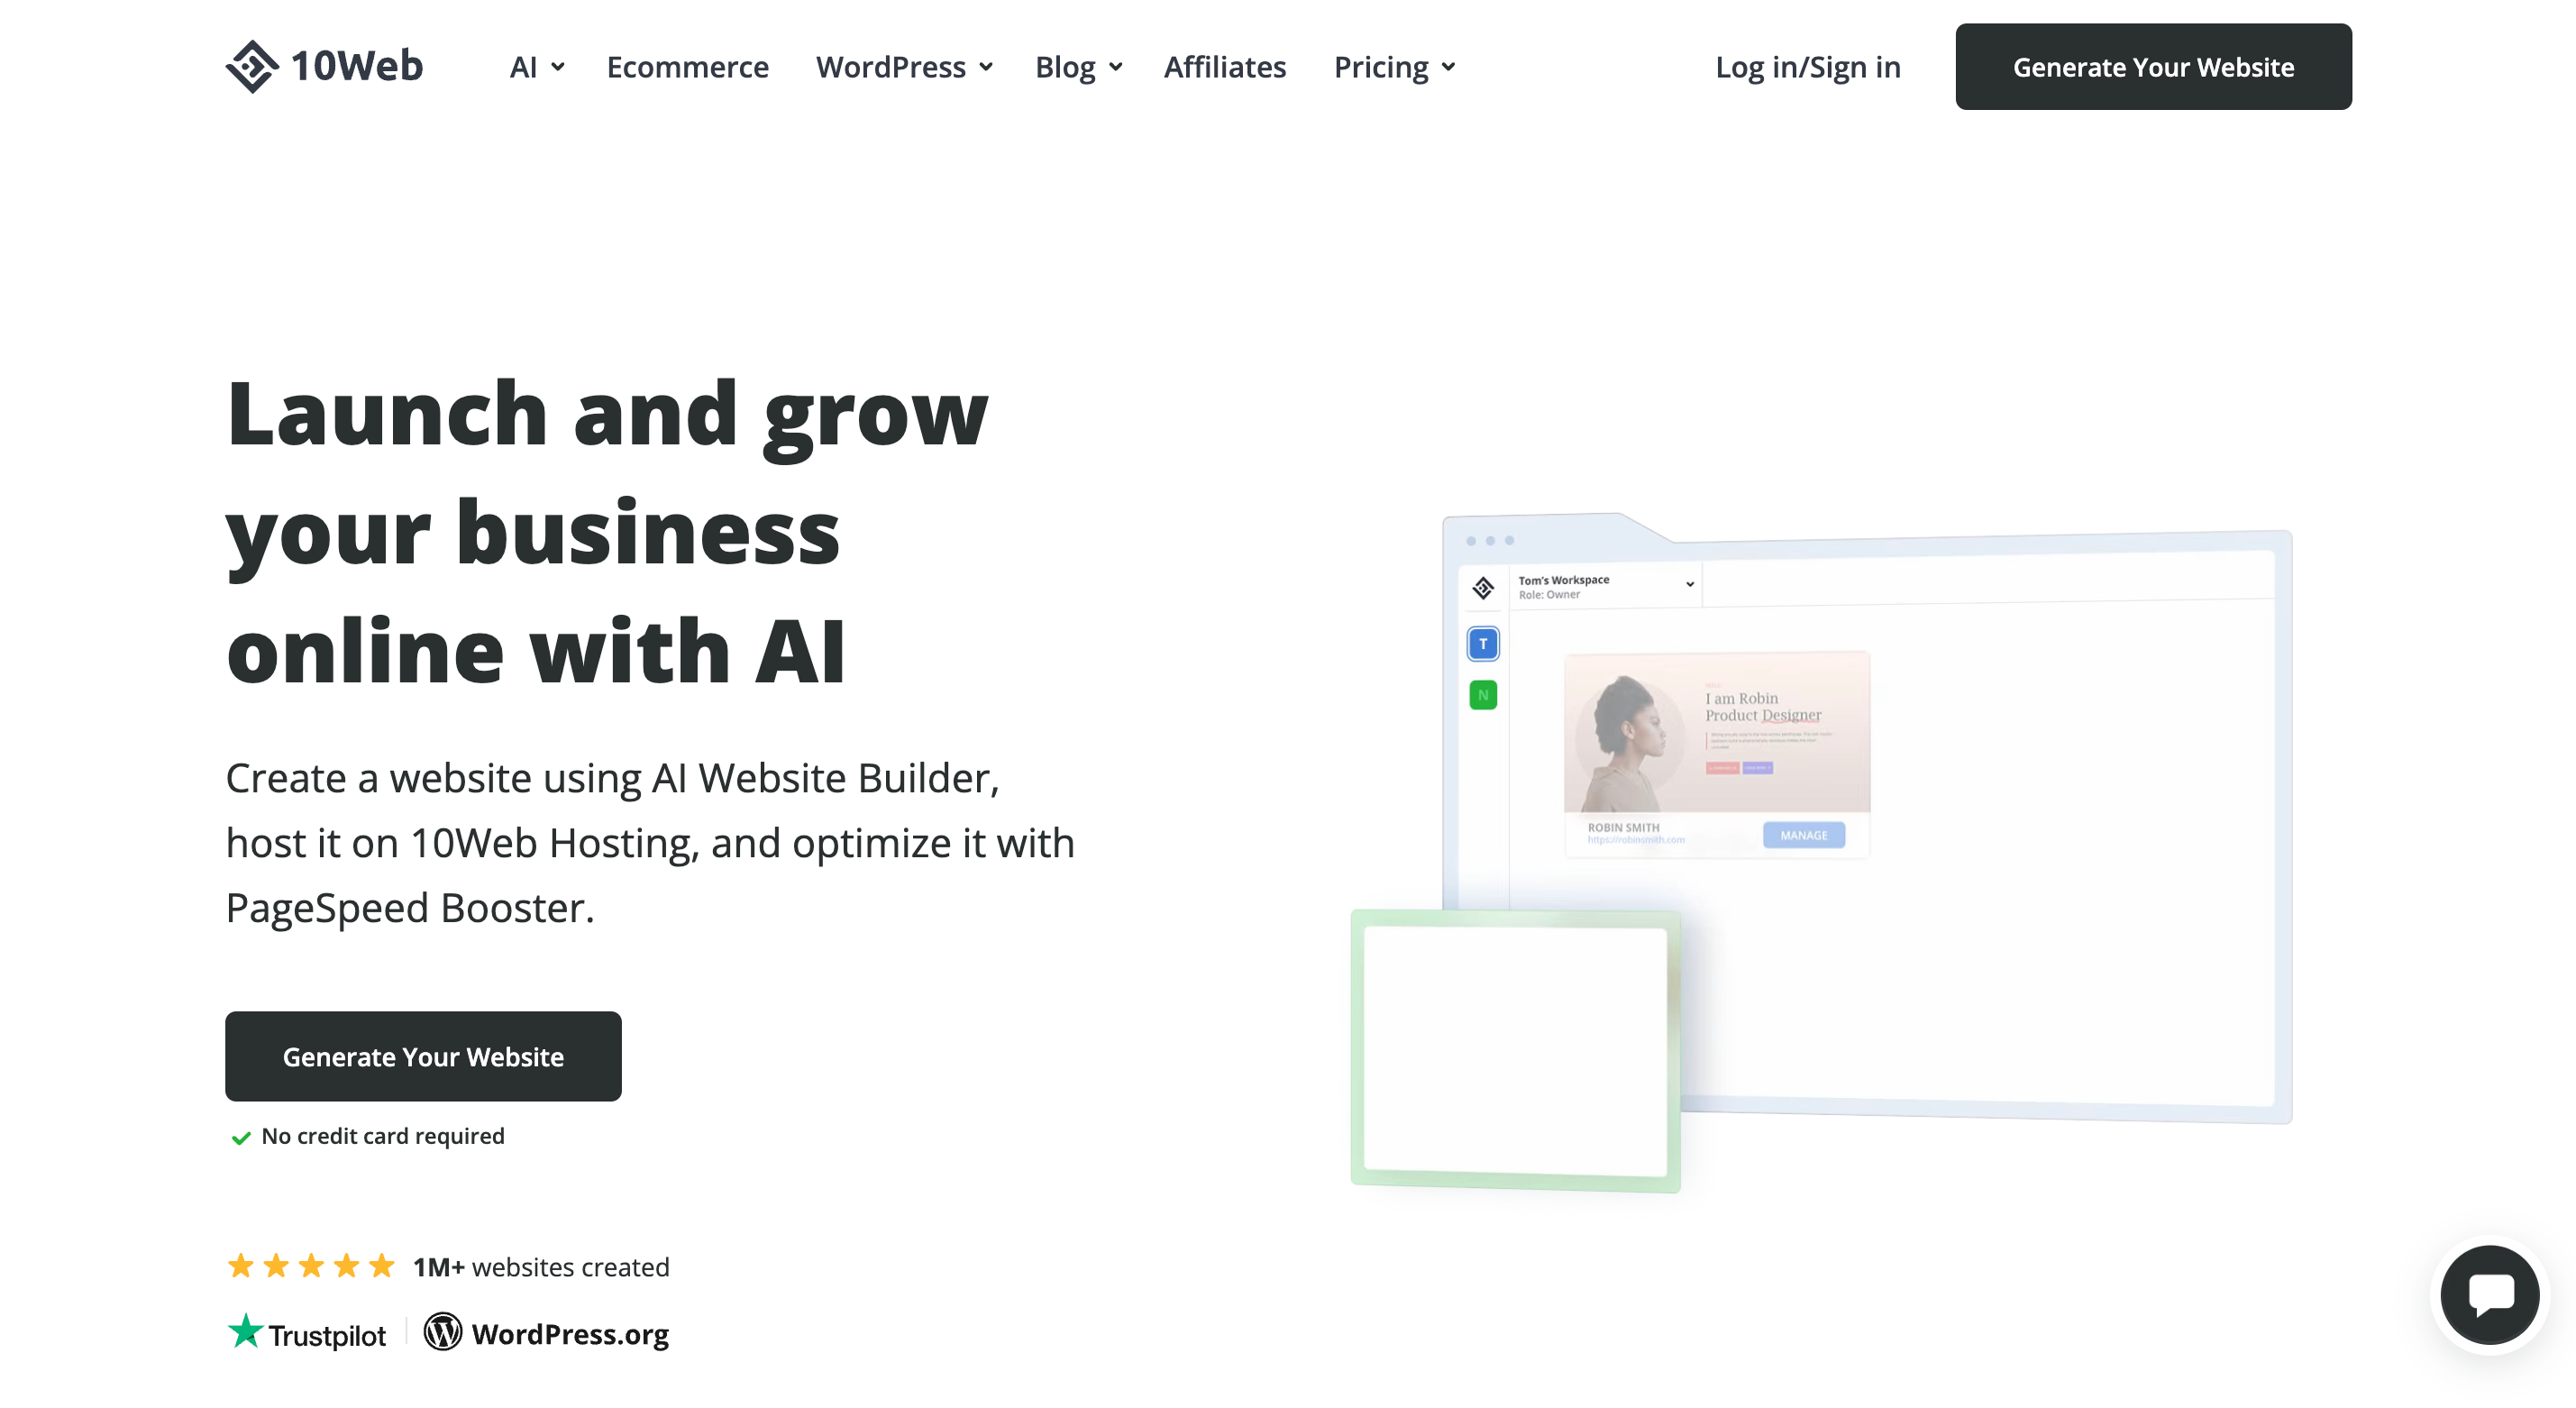 best AI tools for business - 10web homepage screenshot 